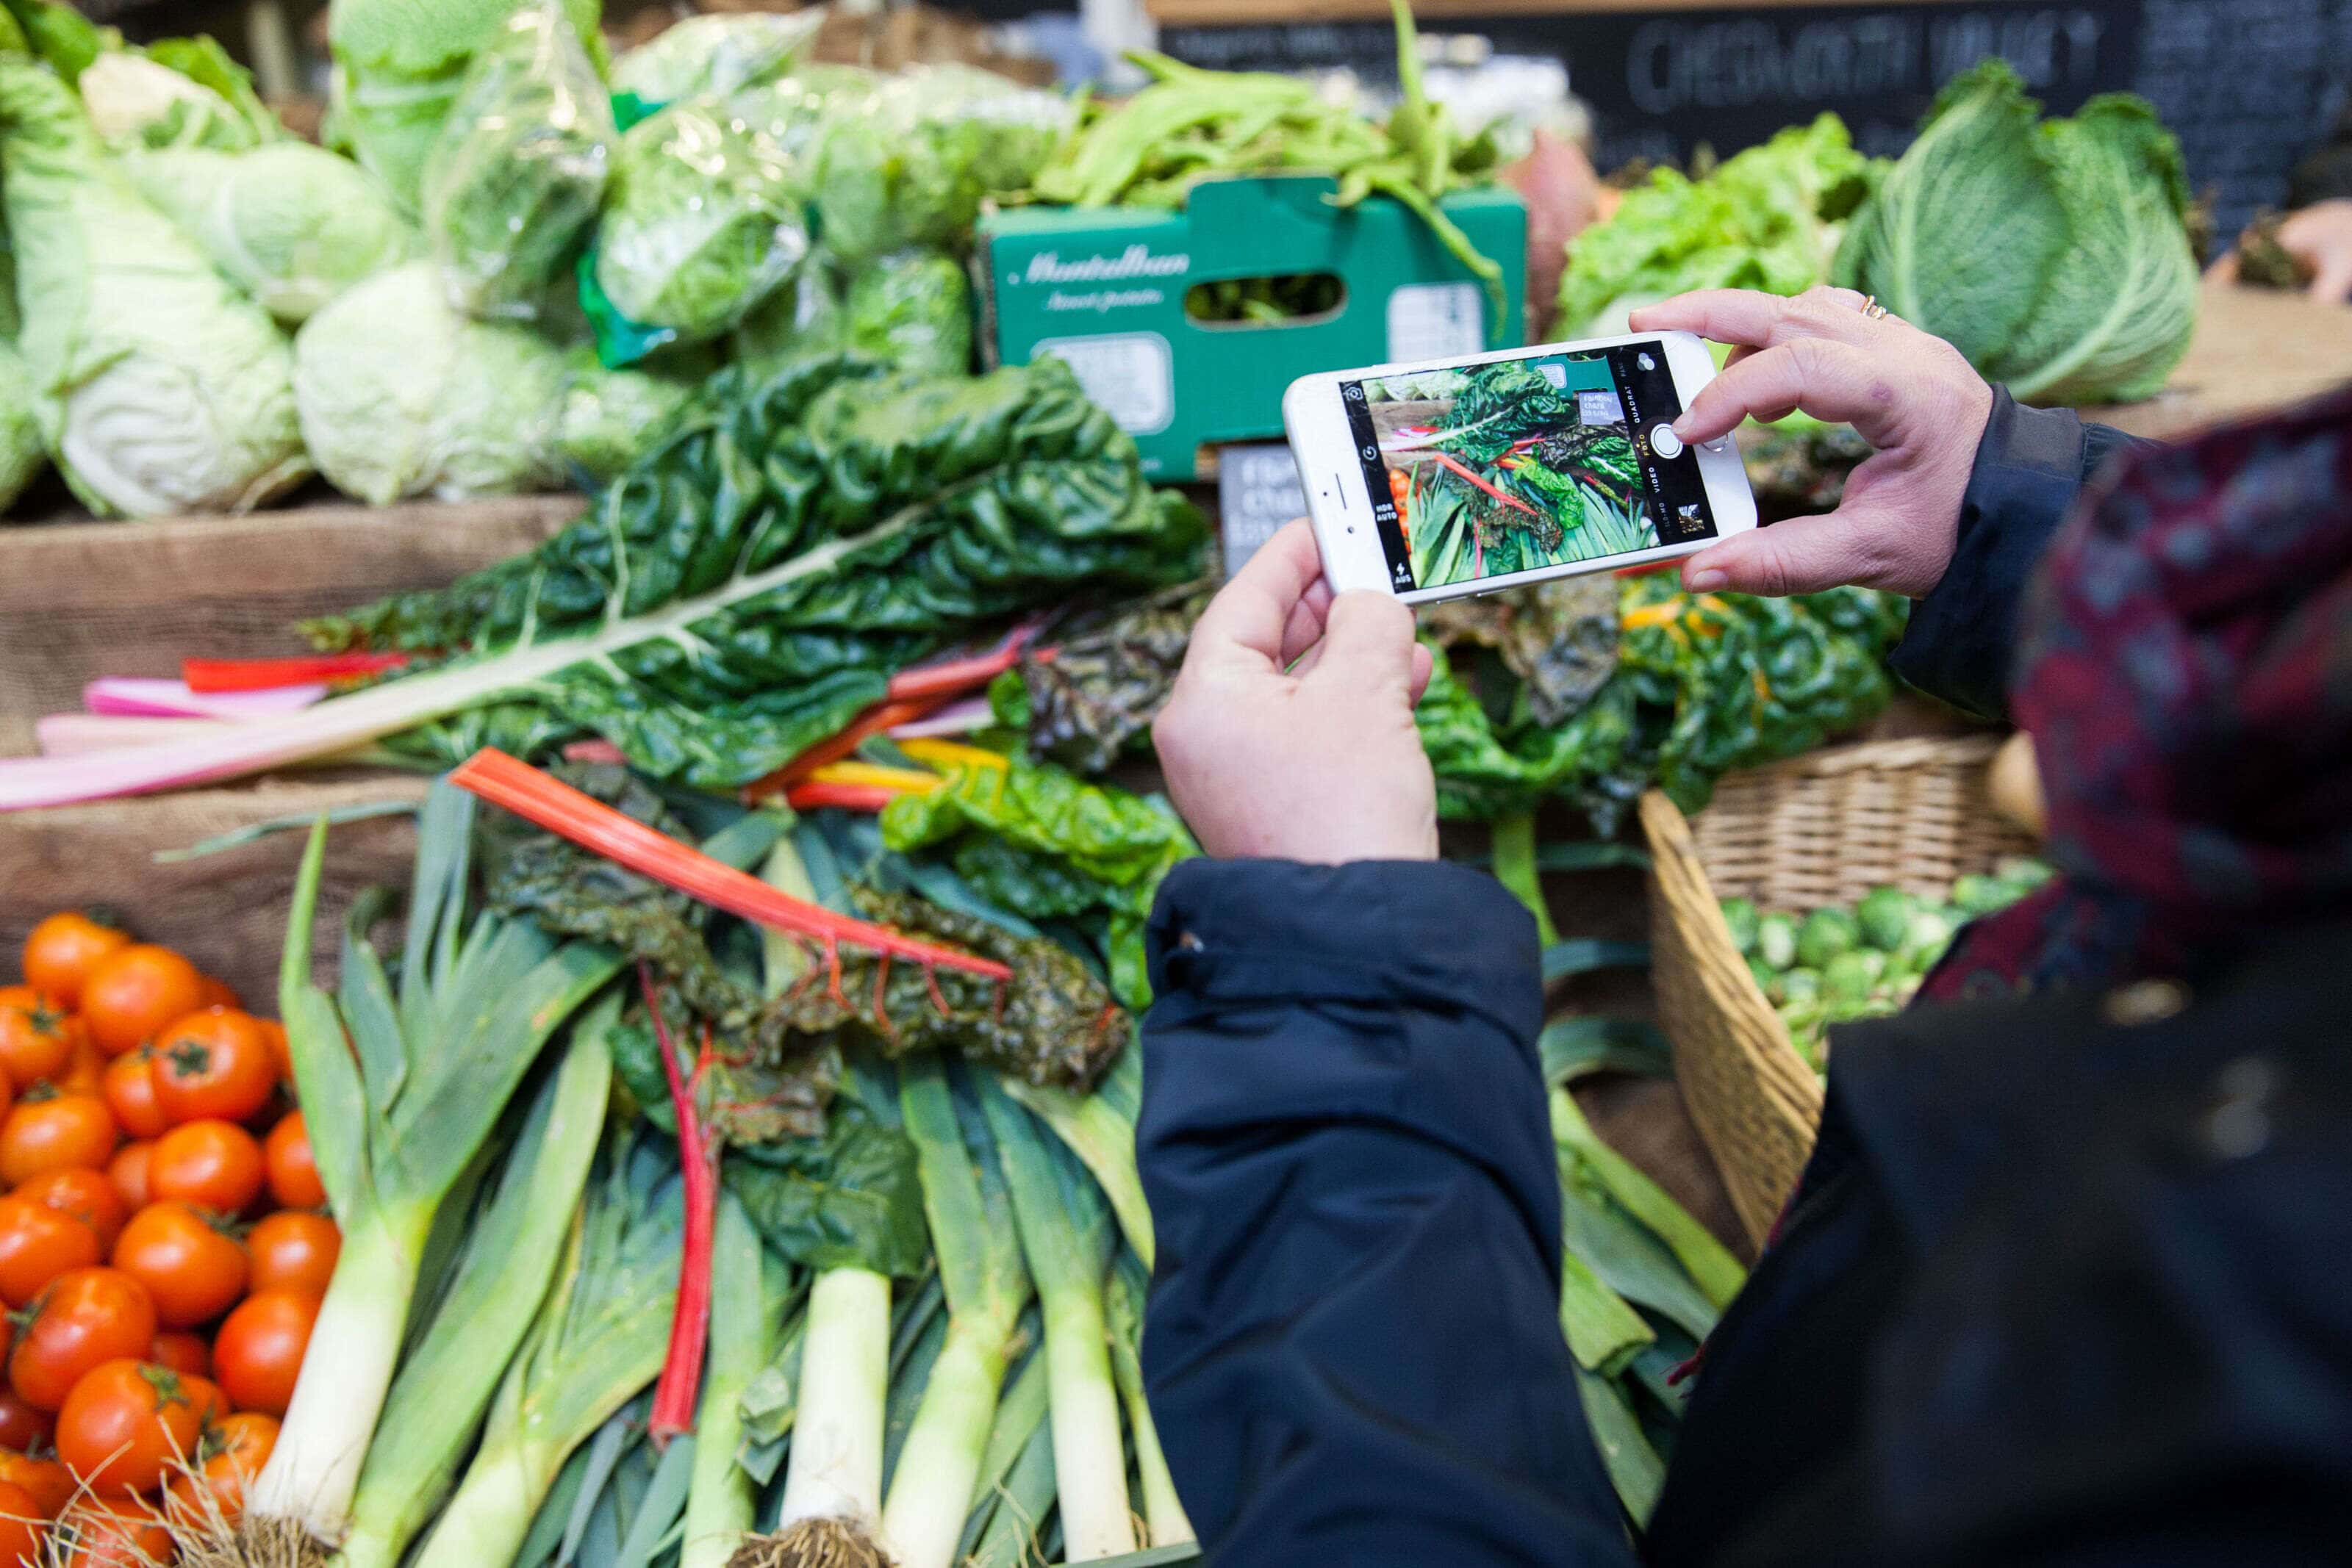 image of an iphone screen taking an image of veg and fruit.